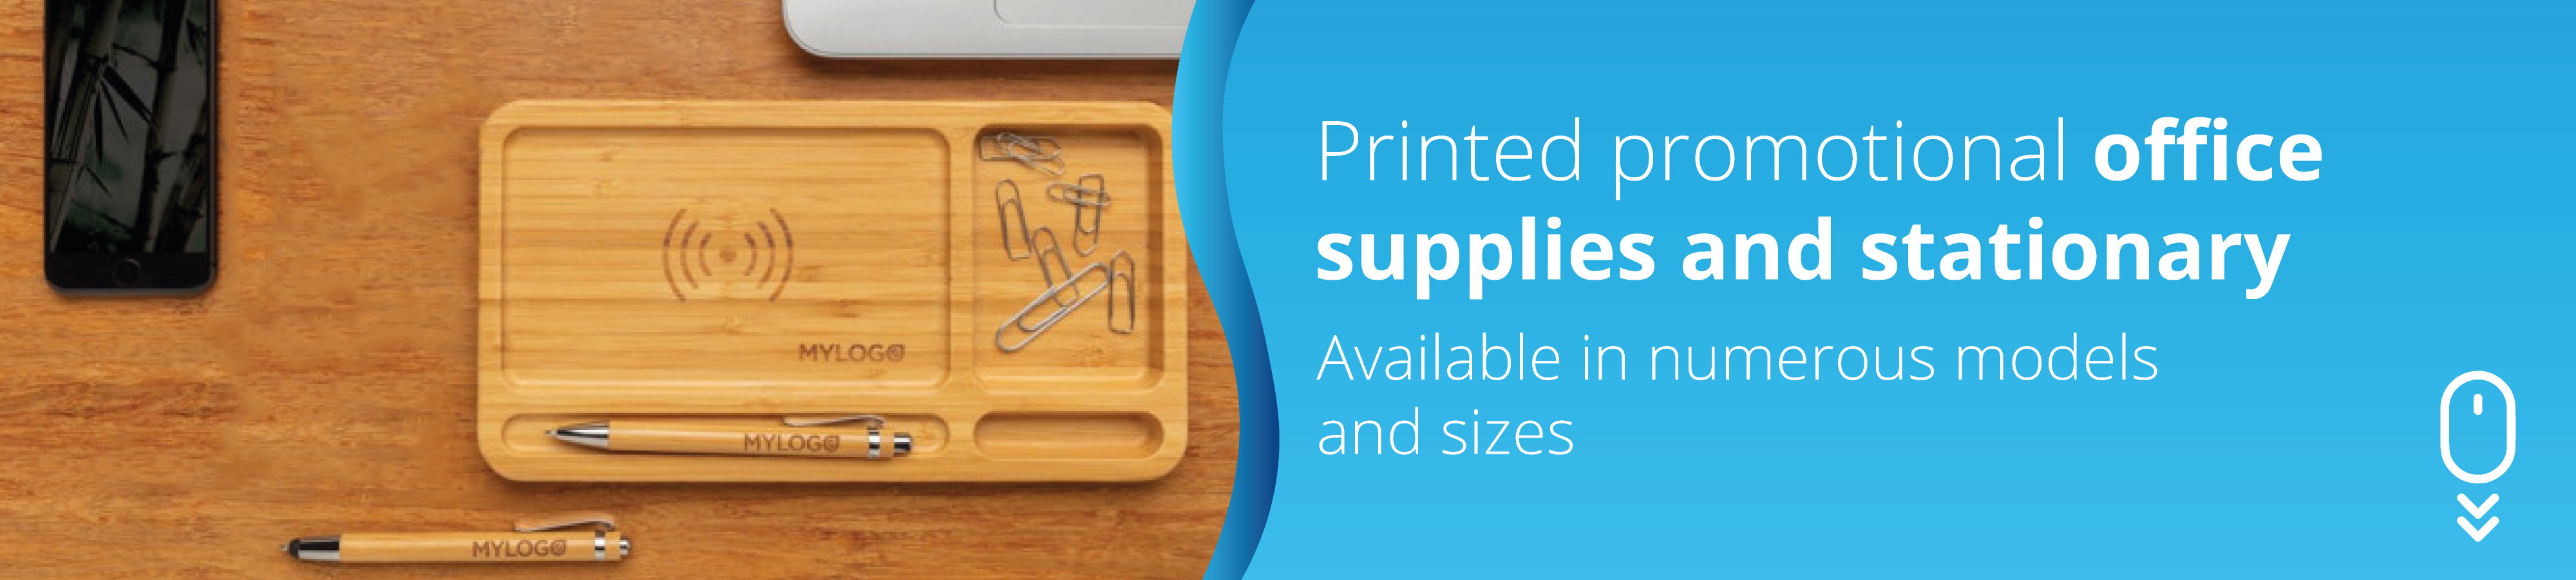 printed-promotional-office-supplies-and-stationary